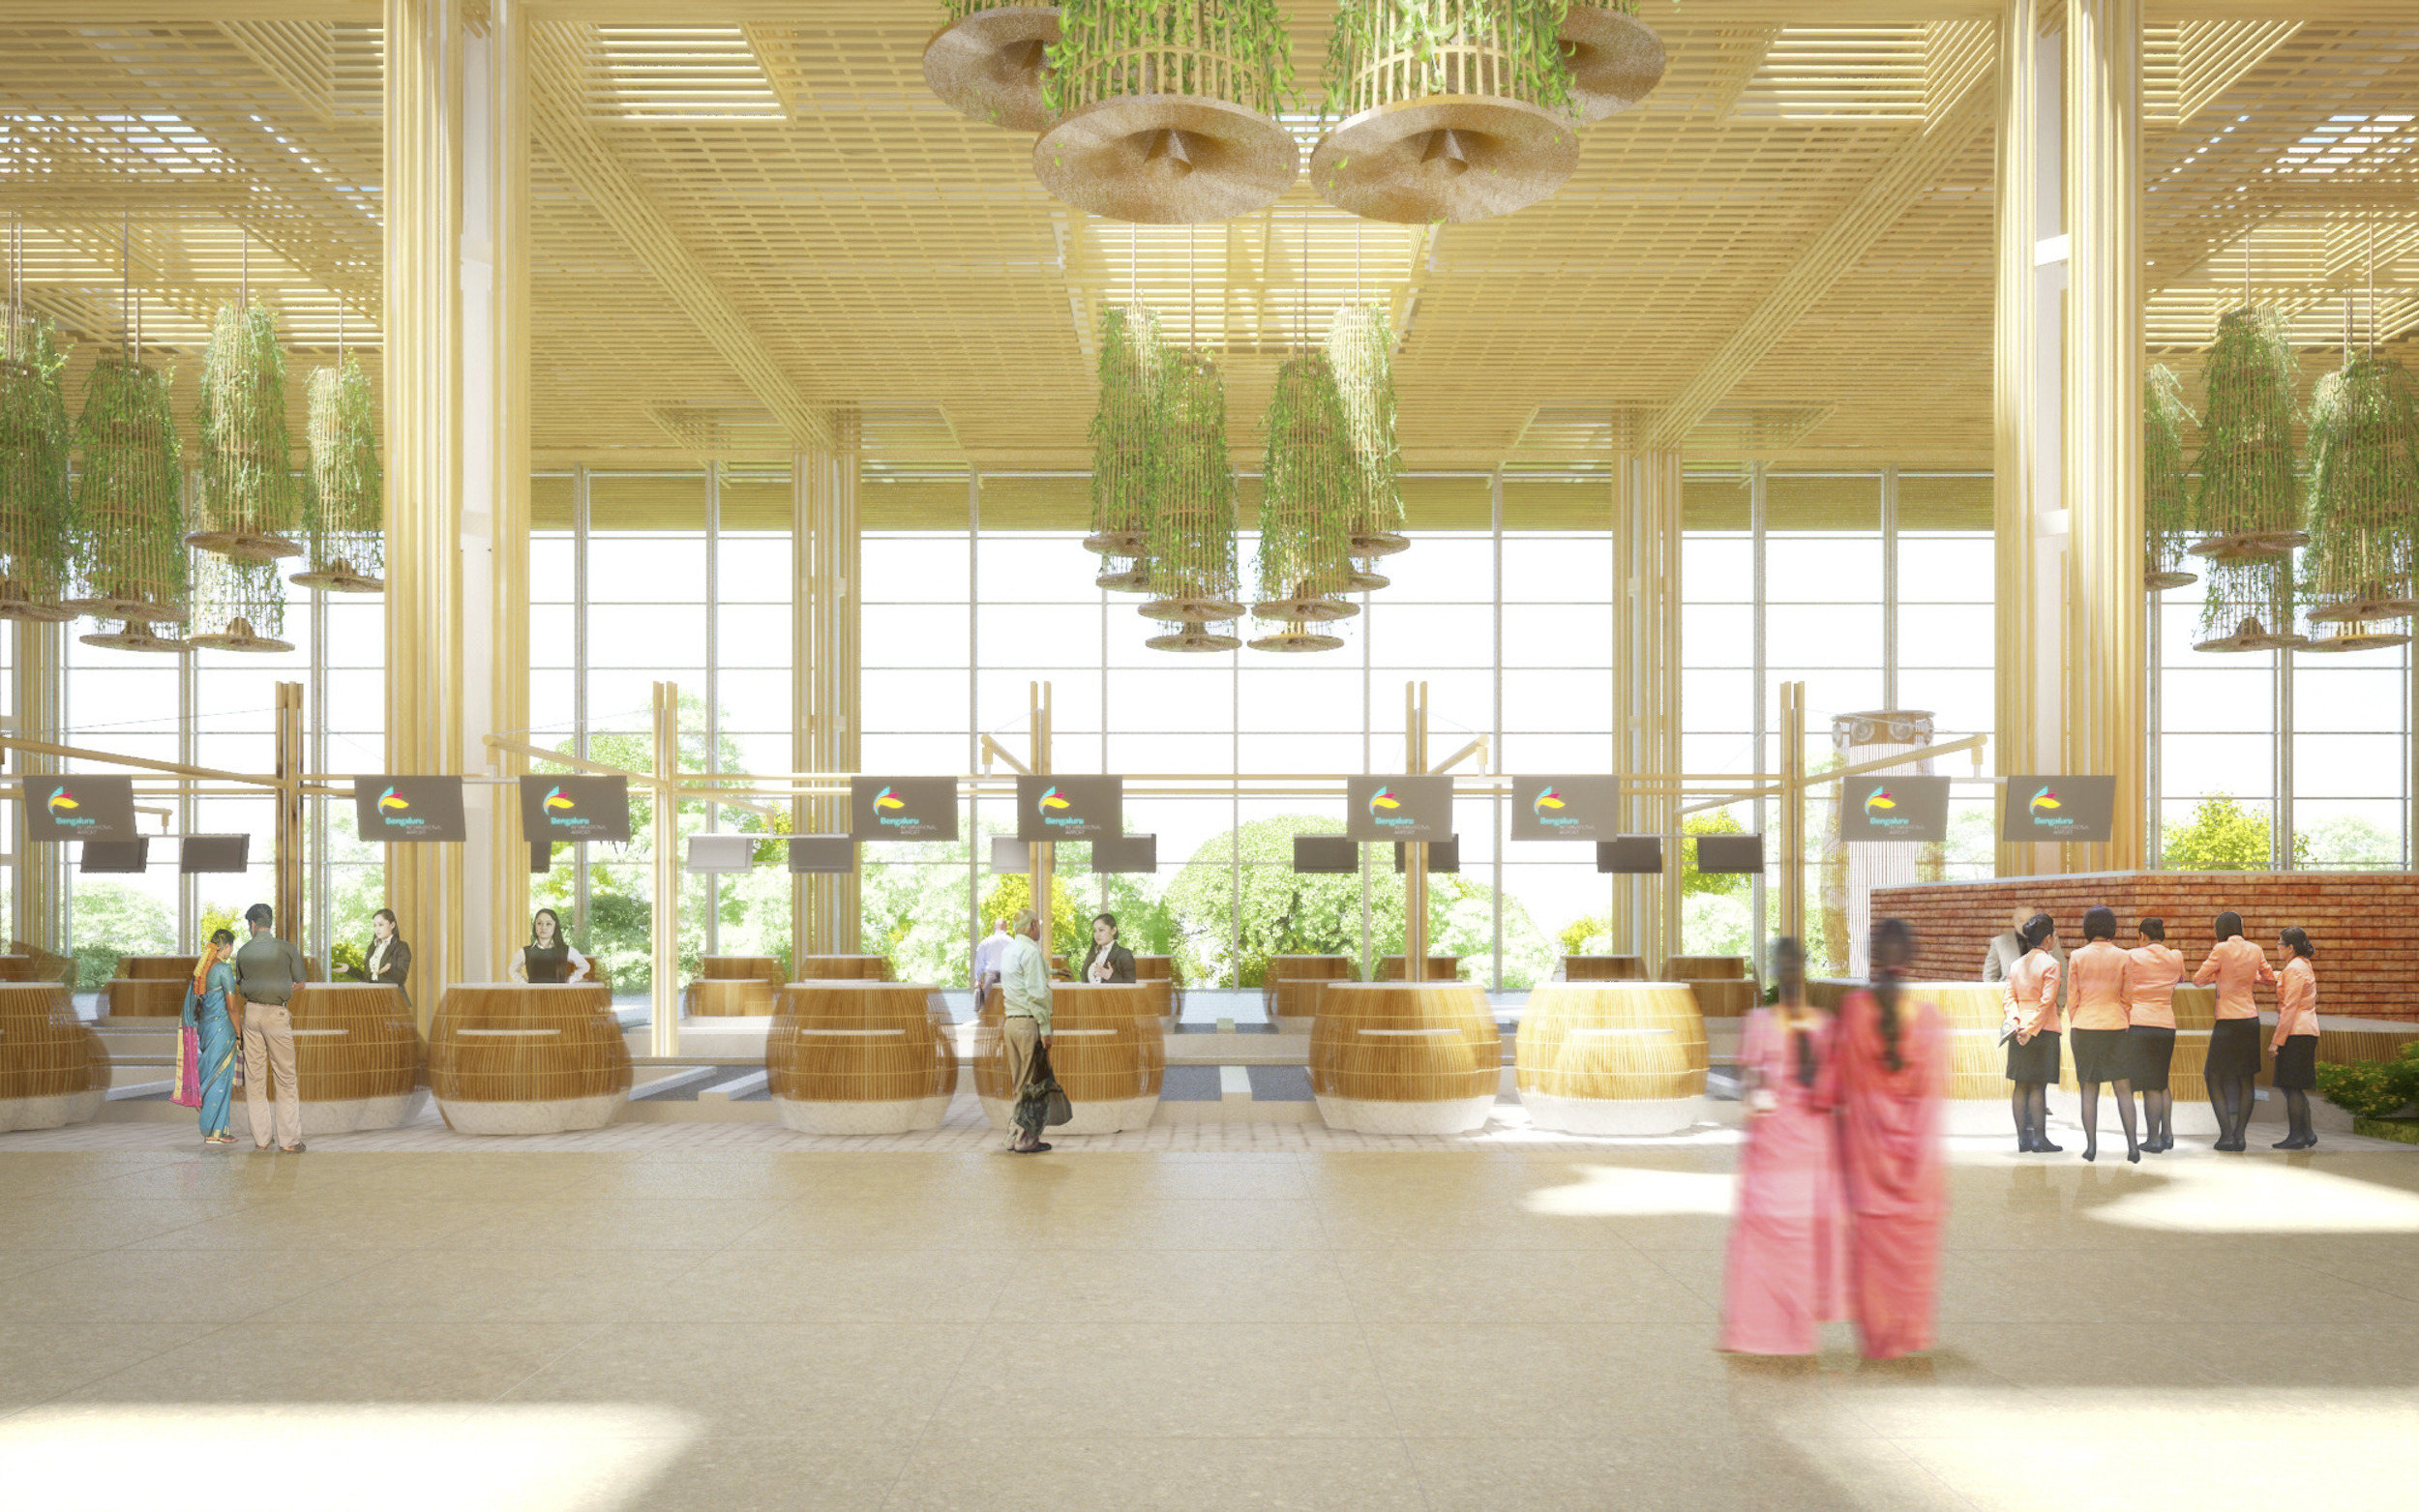 Live plants are everywhere in Terminal 2, including the check-in hall which is graced with hanging pendants.